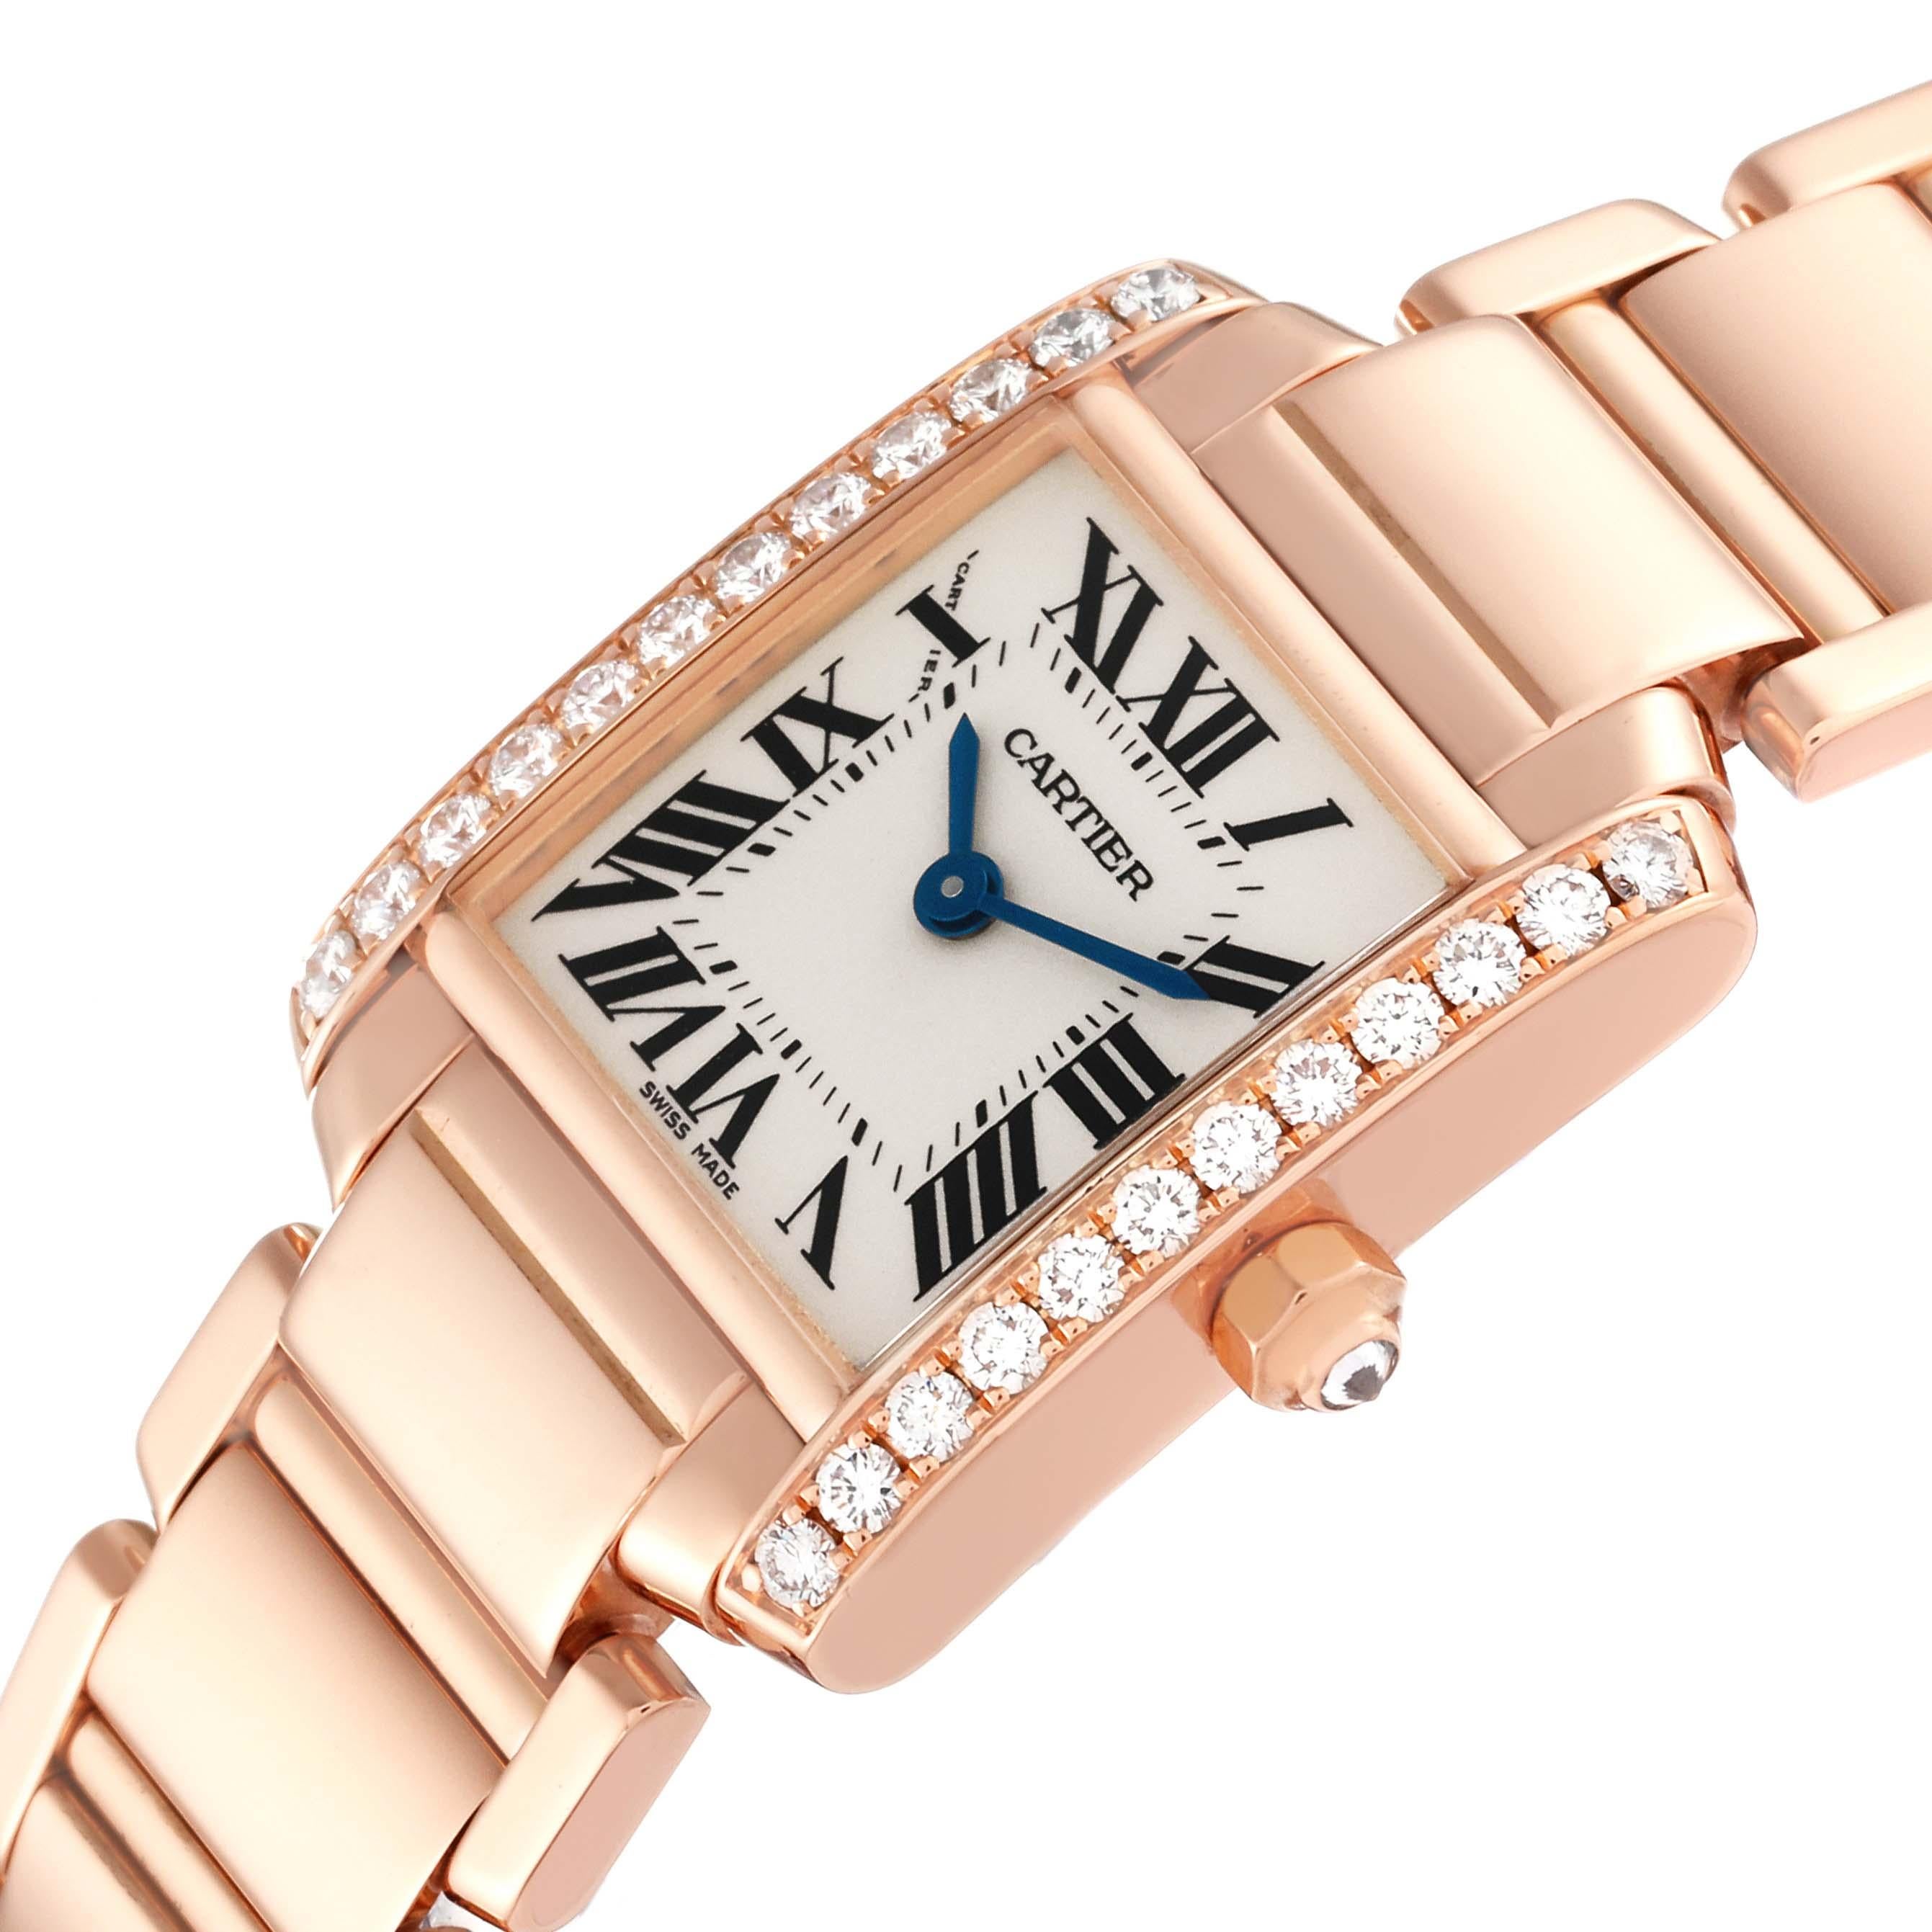 Cartier Tank Francaise Small Rose Gold Diamond Ladies Watch WE10456H For Sale 1